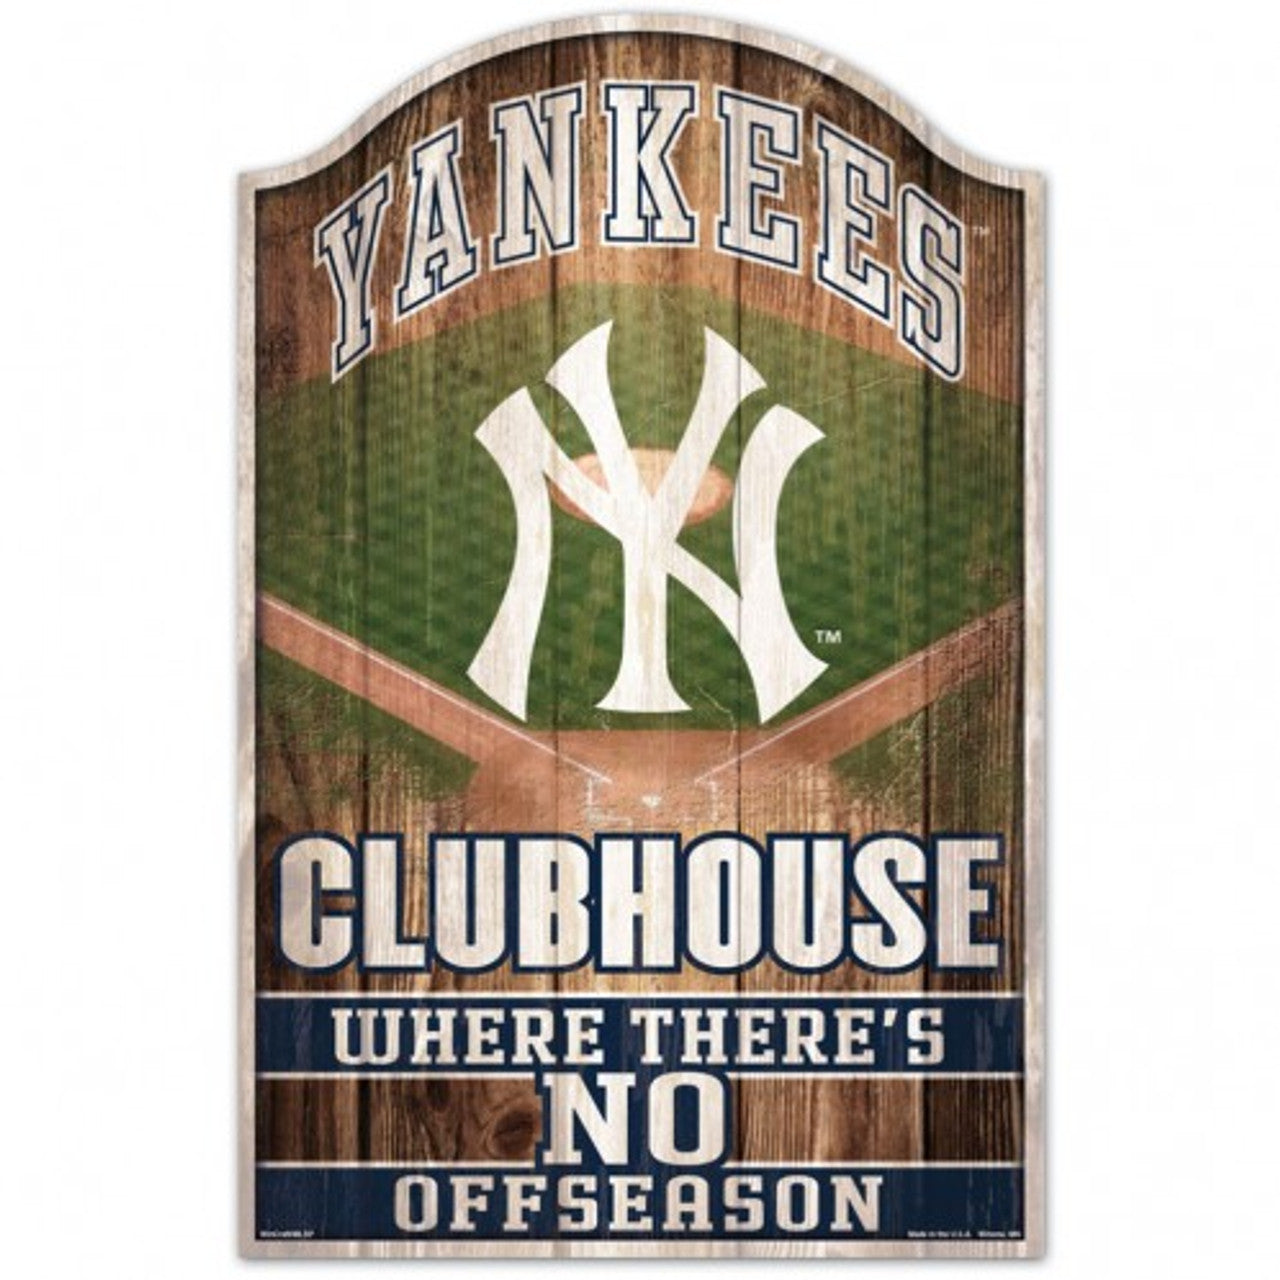 New York Yankees 11" x 17" Fan Cave Wood Sign by Wincraft"